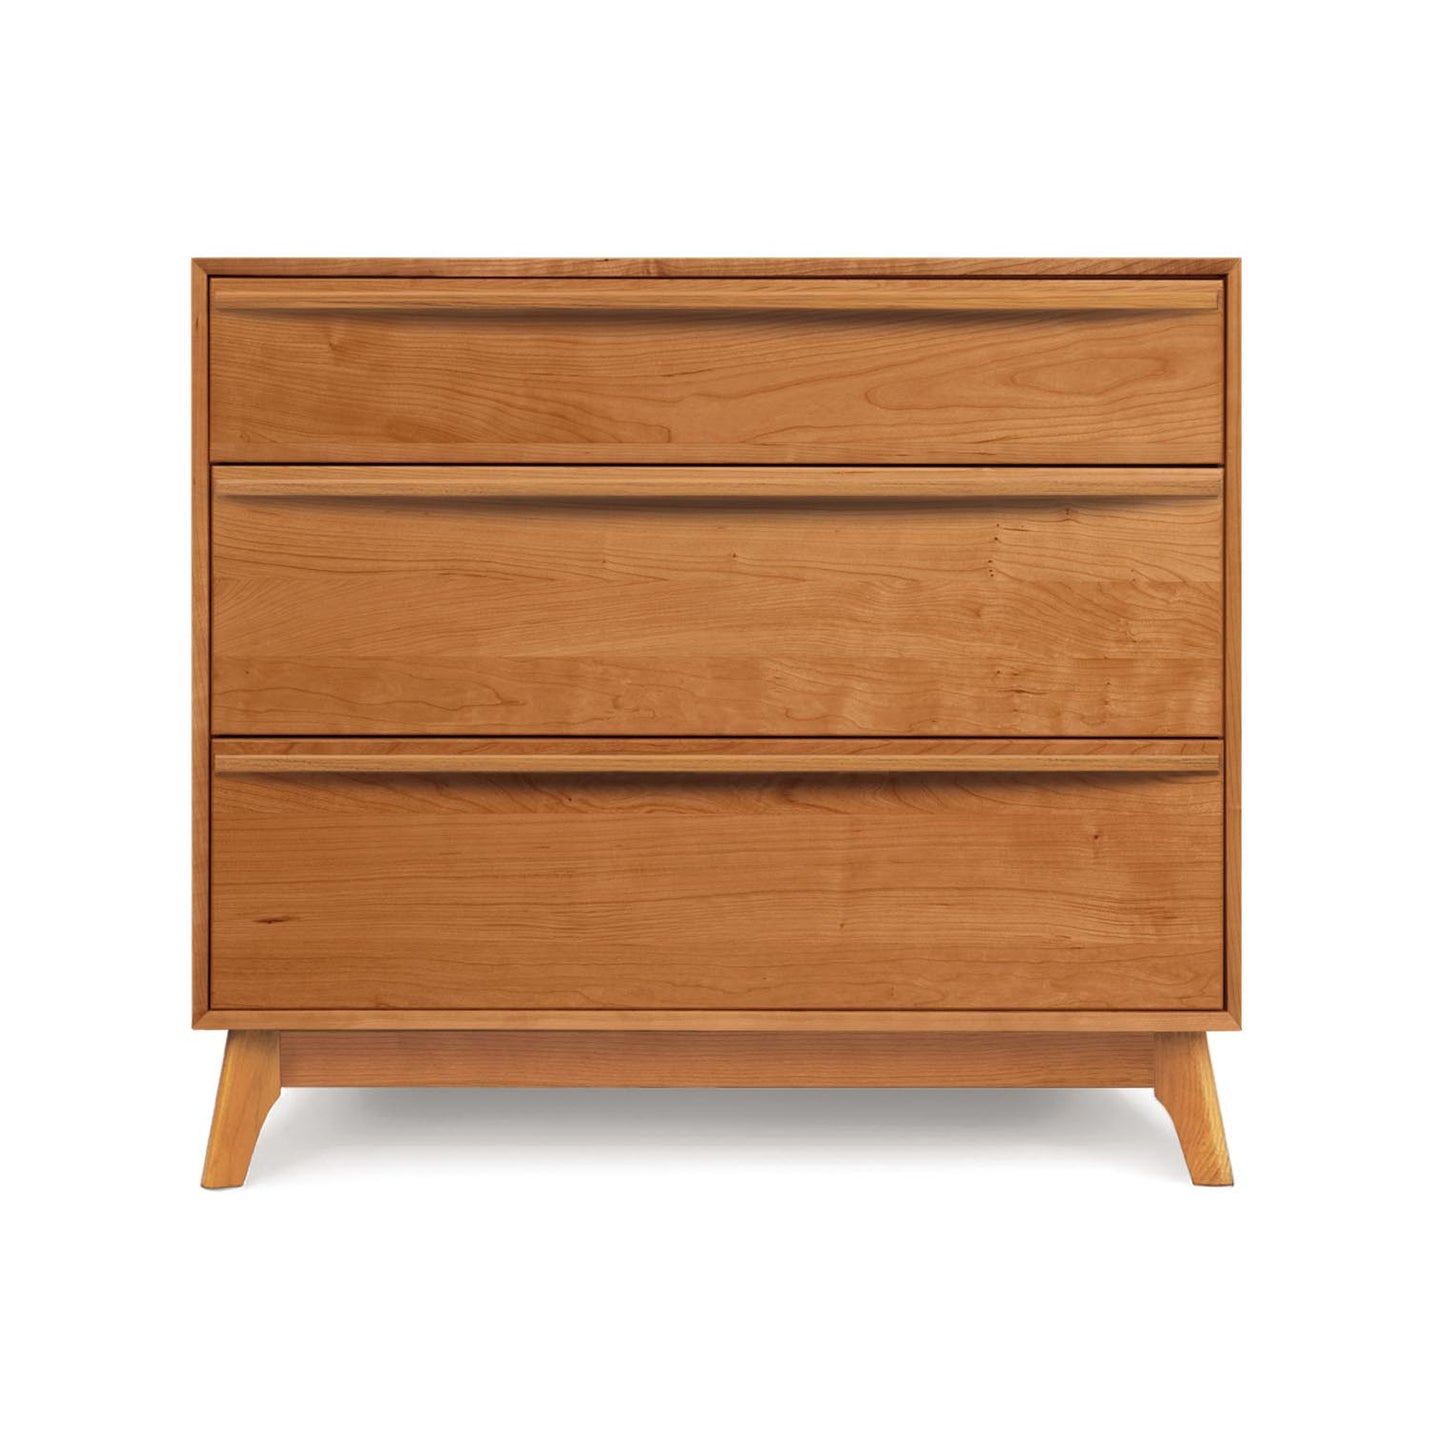 A solid natural cherry Copeland Furniture Catalina 3-Drawer Chest isolated on a white background.